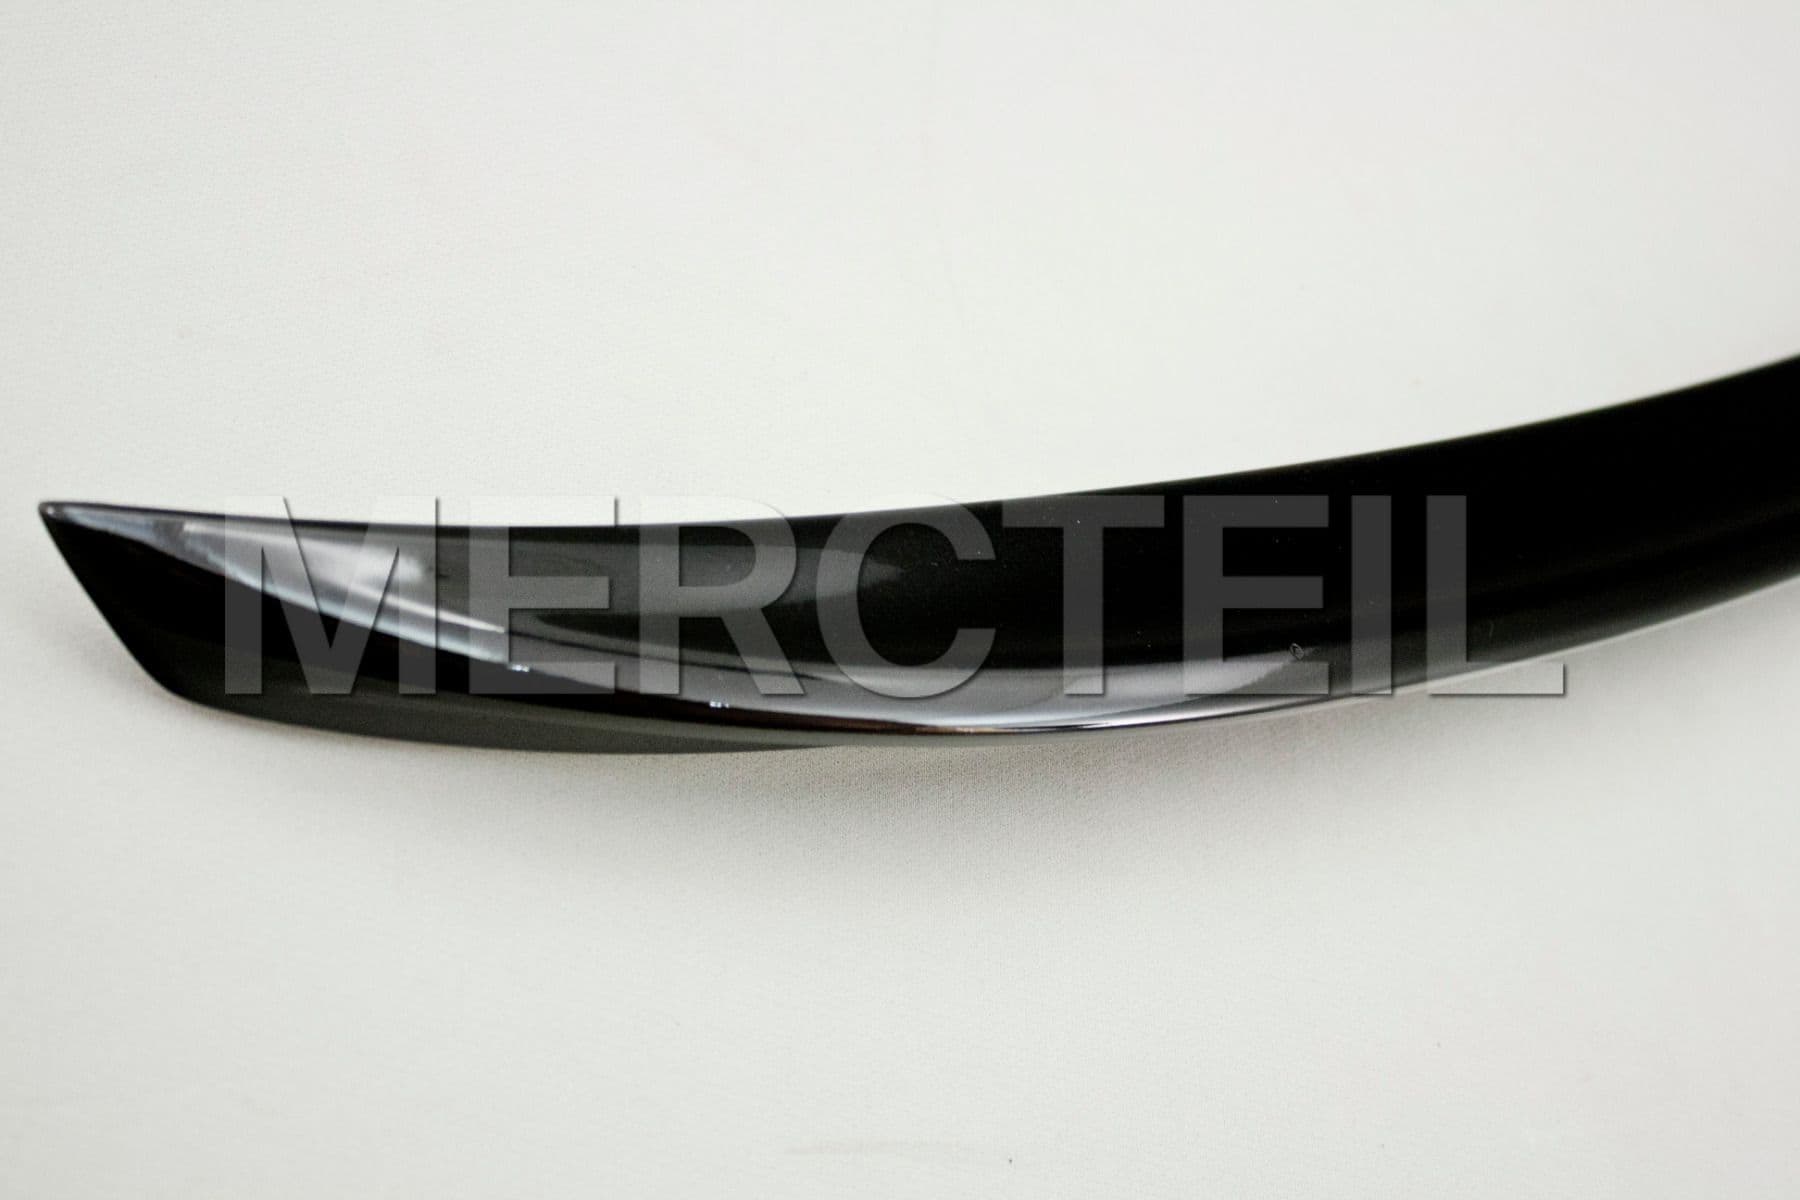 SL Class Spoiler R230 Genuine Mercedes AMG (part number: A23079000883541)